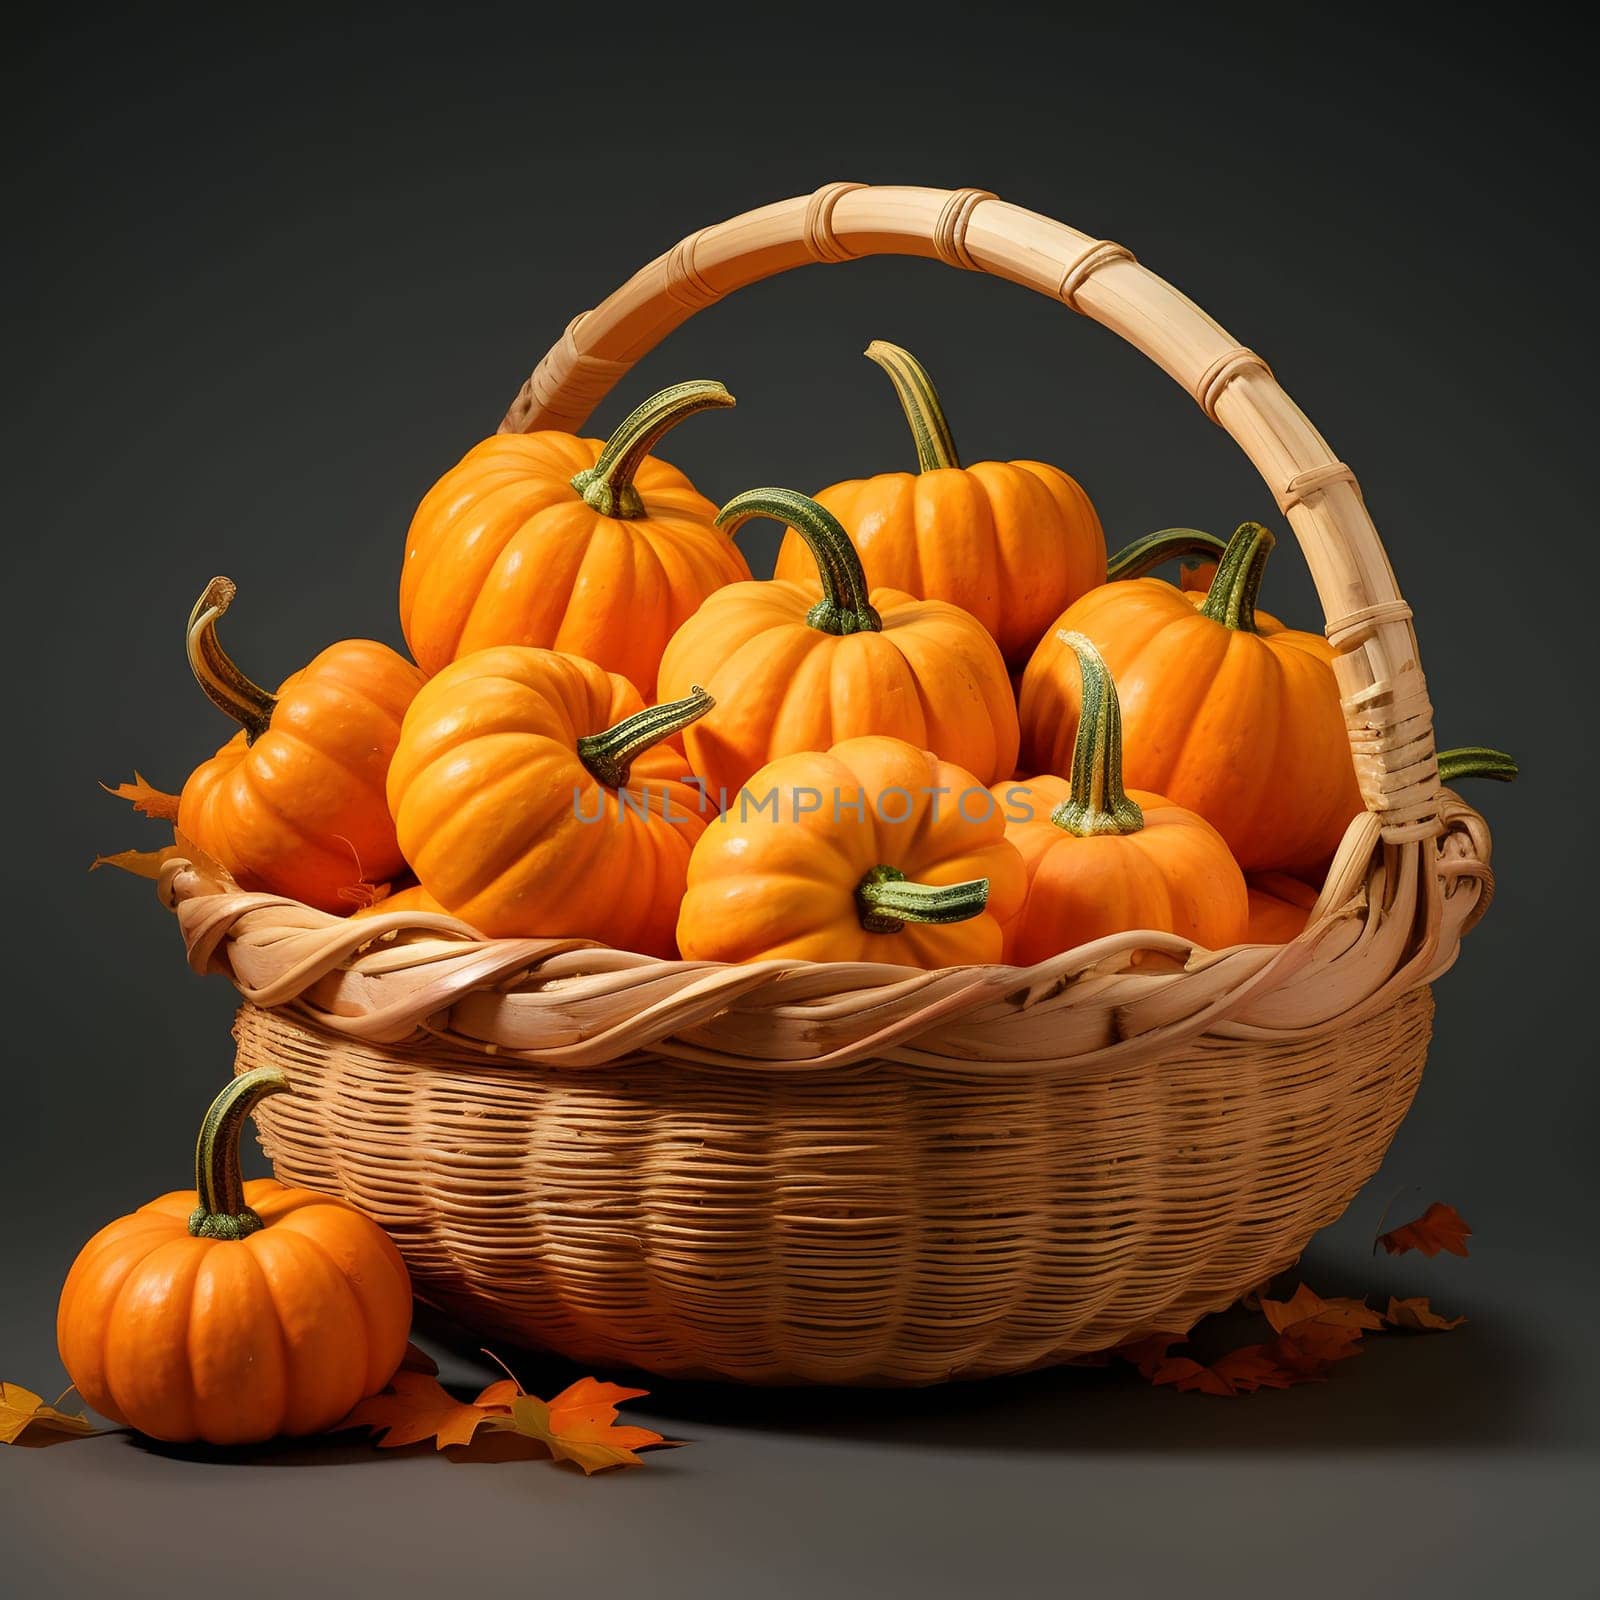 Wicker basket with small pumpkins on a dark background. Pumpkin as a dish of thanksgiving for the harvest. The atmosphere of joy and celebration.